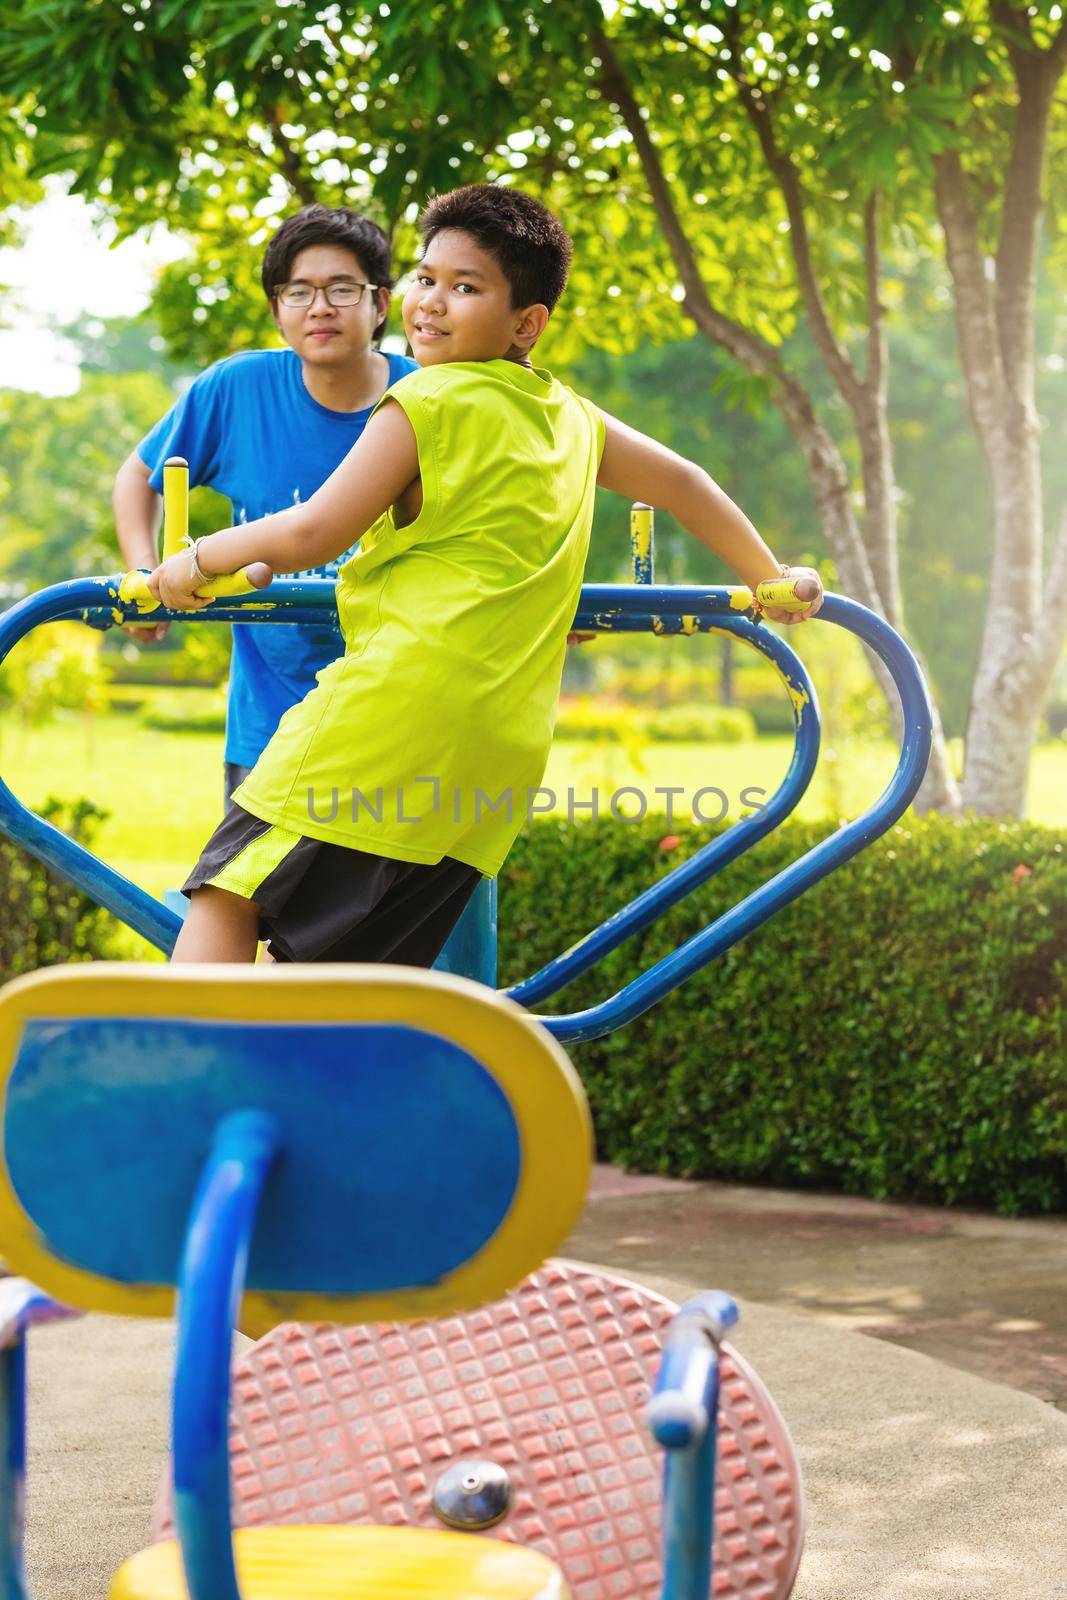 Child playing on outdoor playground. Kids play on school or kindergarten yard. Active kid on colorful swing. Healthy summer activity for children. Little boy swinging in tropical garden.